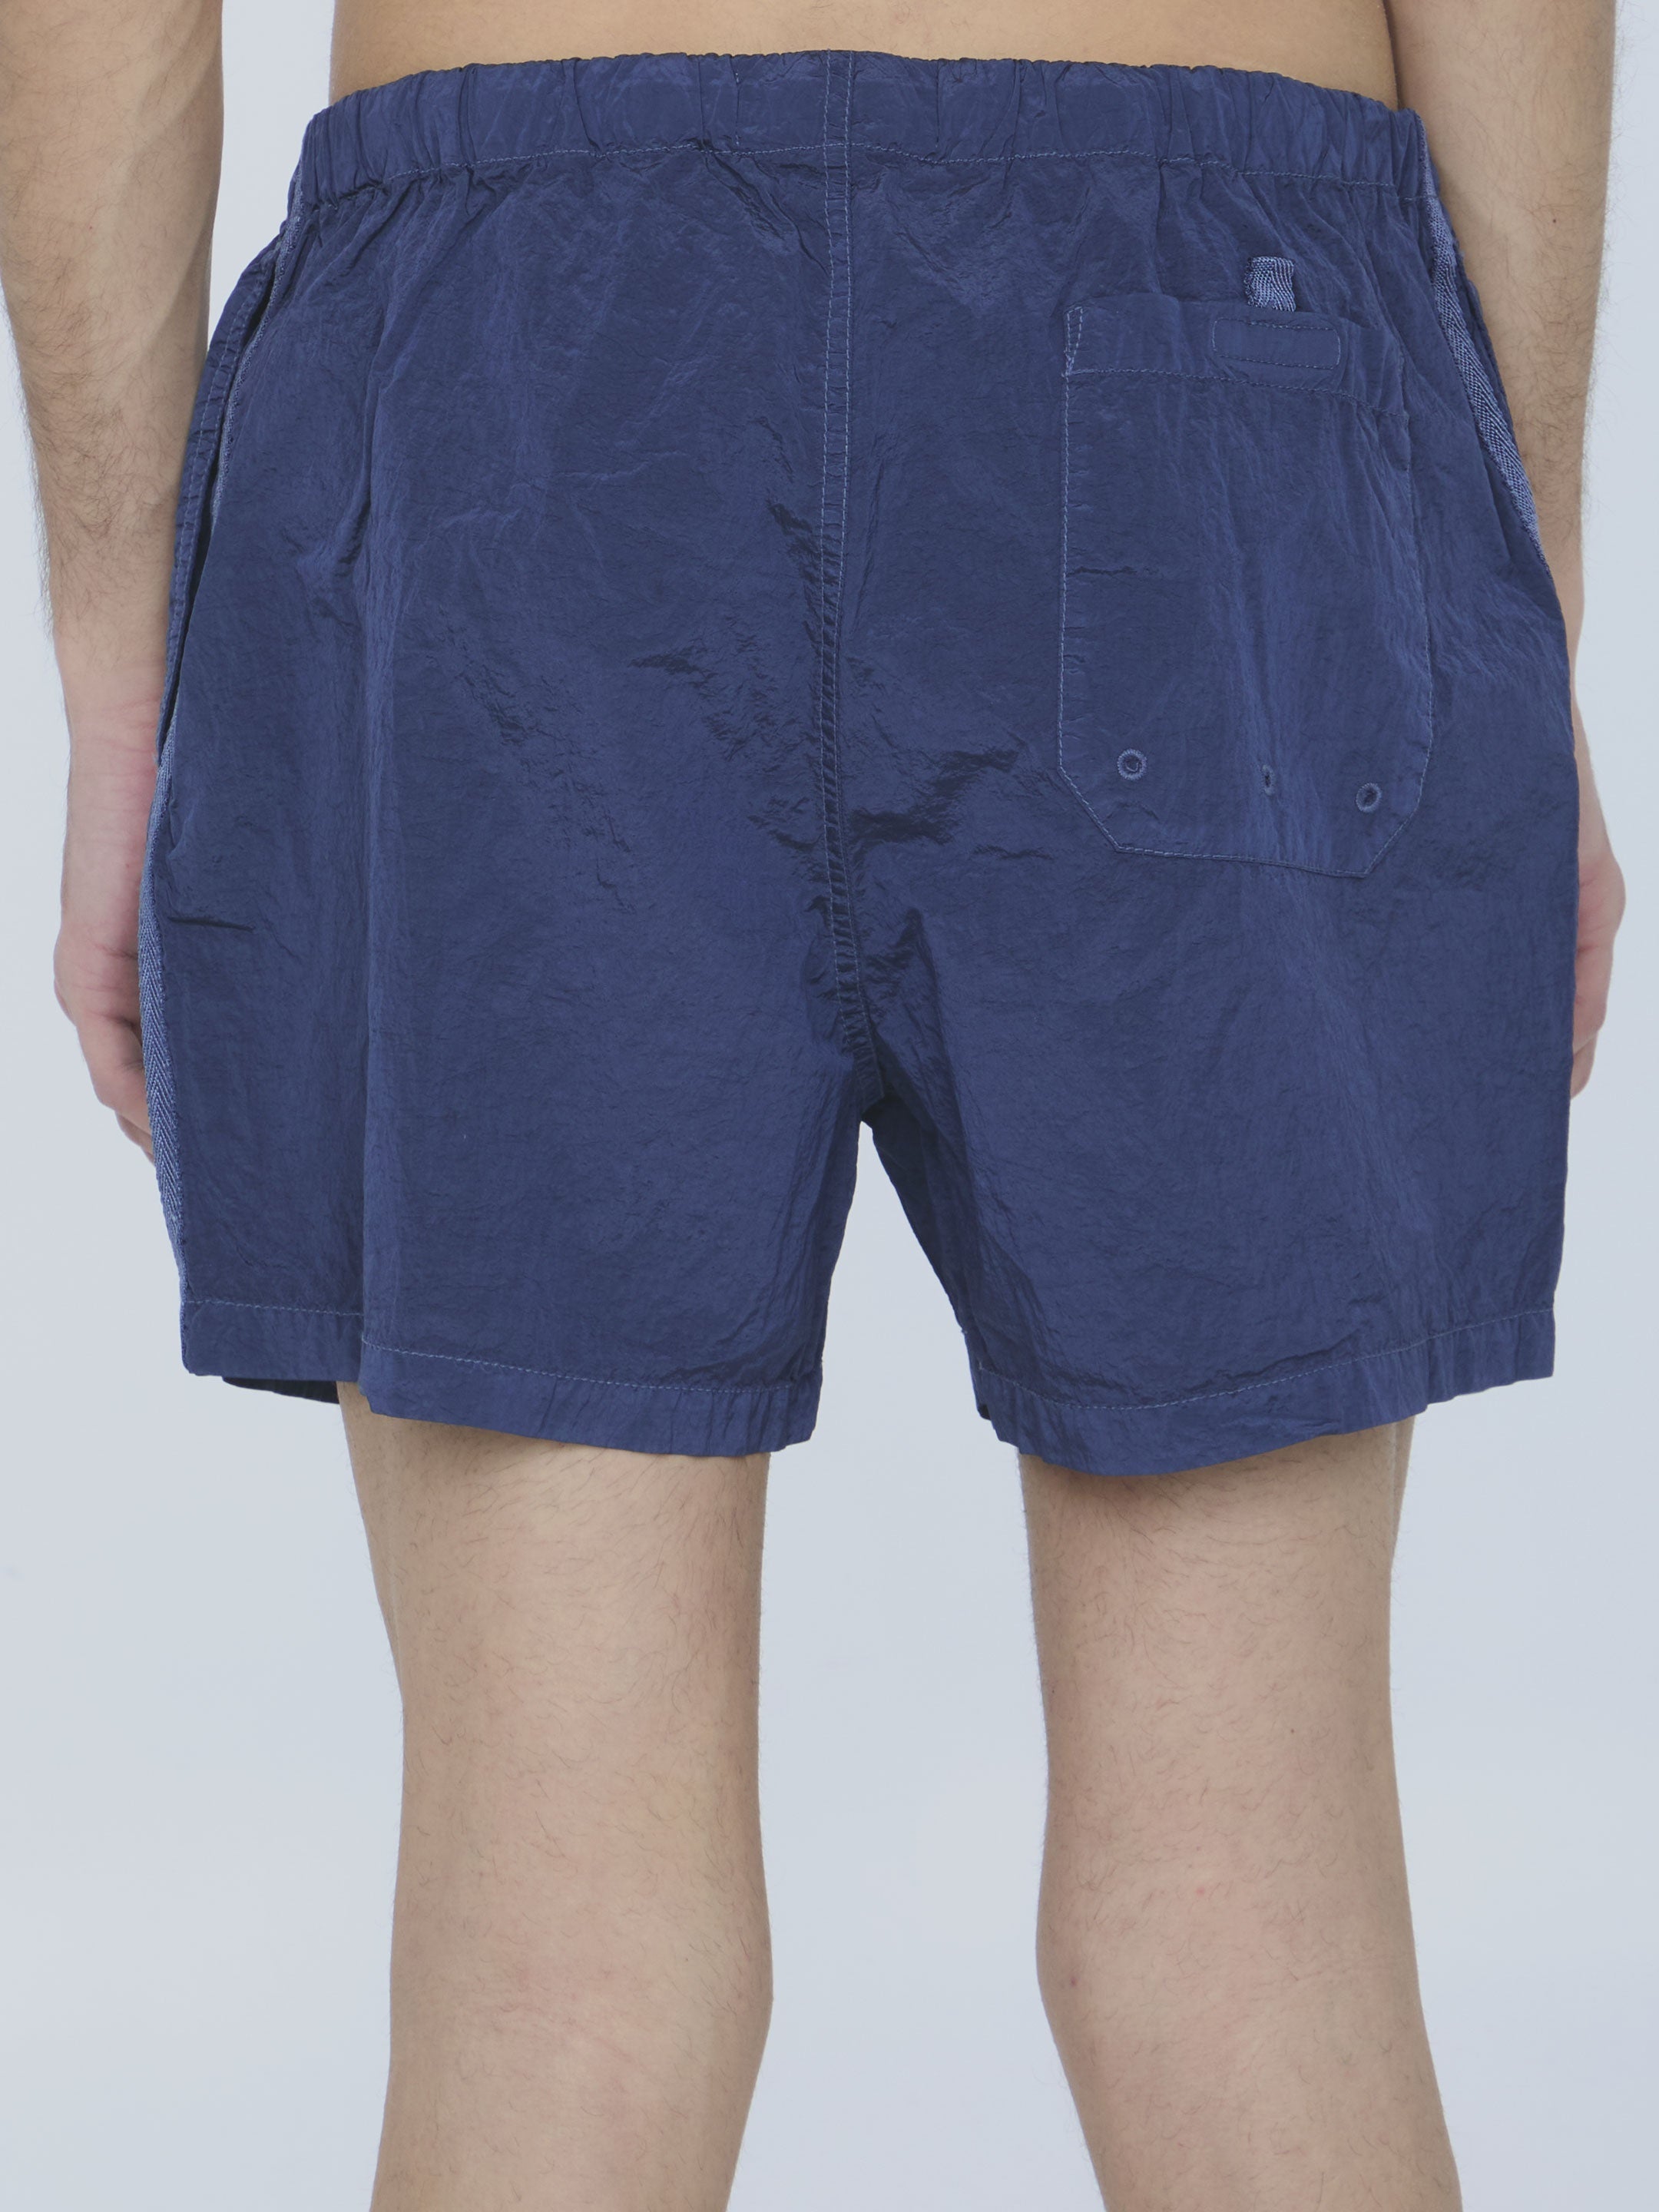 STONE-ISLAND-OUTLET-SALE-Swim-shorts-with-logo-Badebekleidung-ARCHIVE-COLLECTION-4.jpg